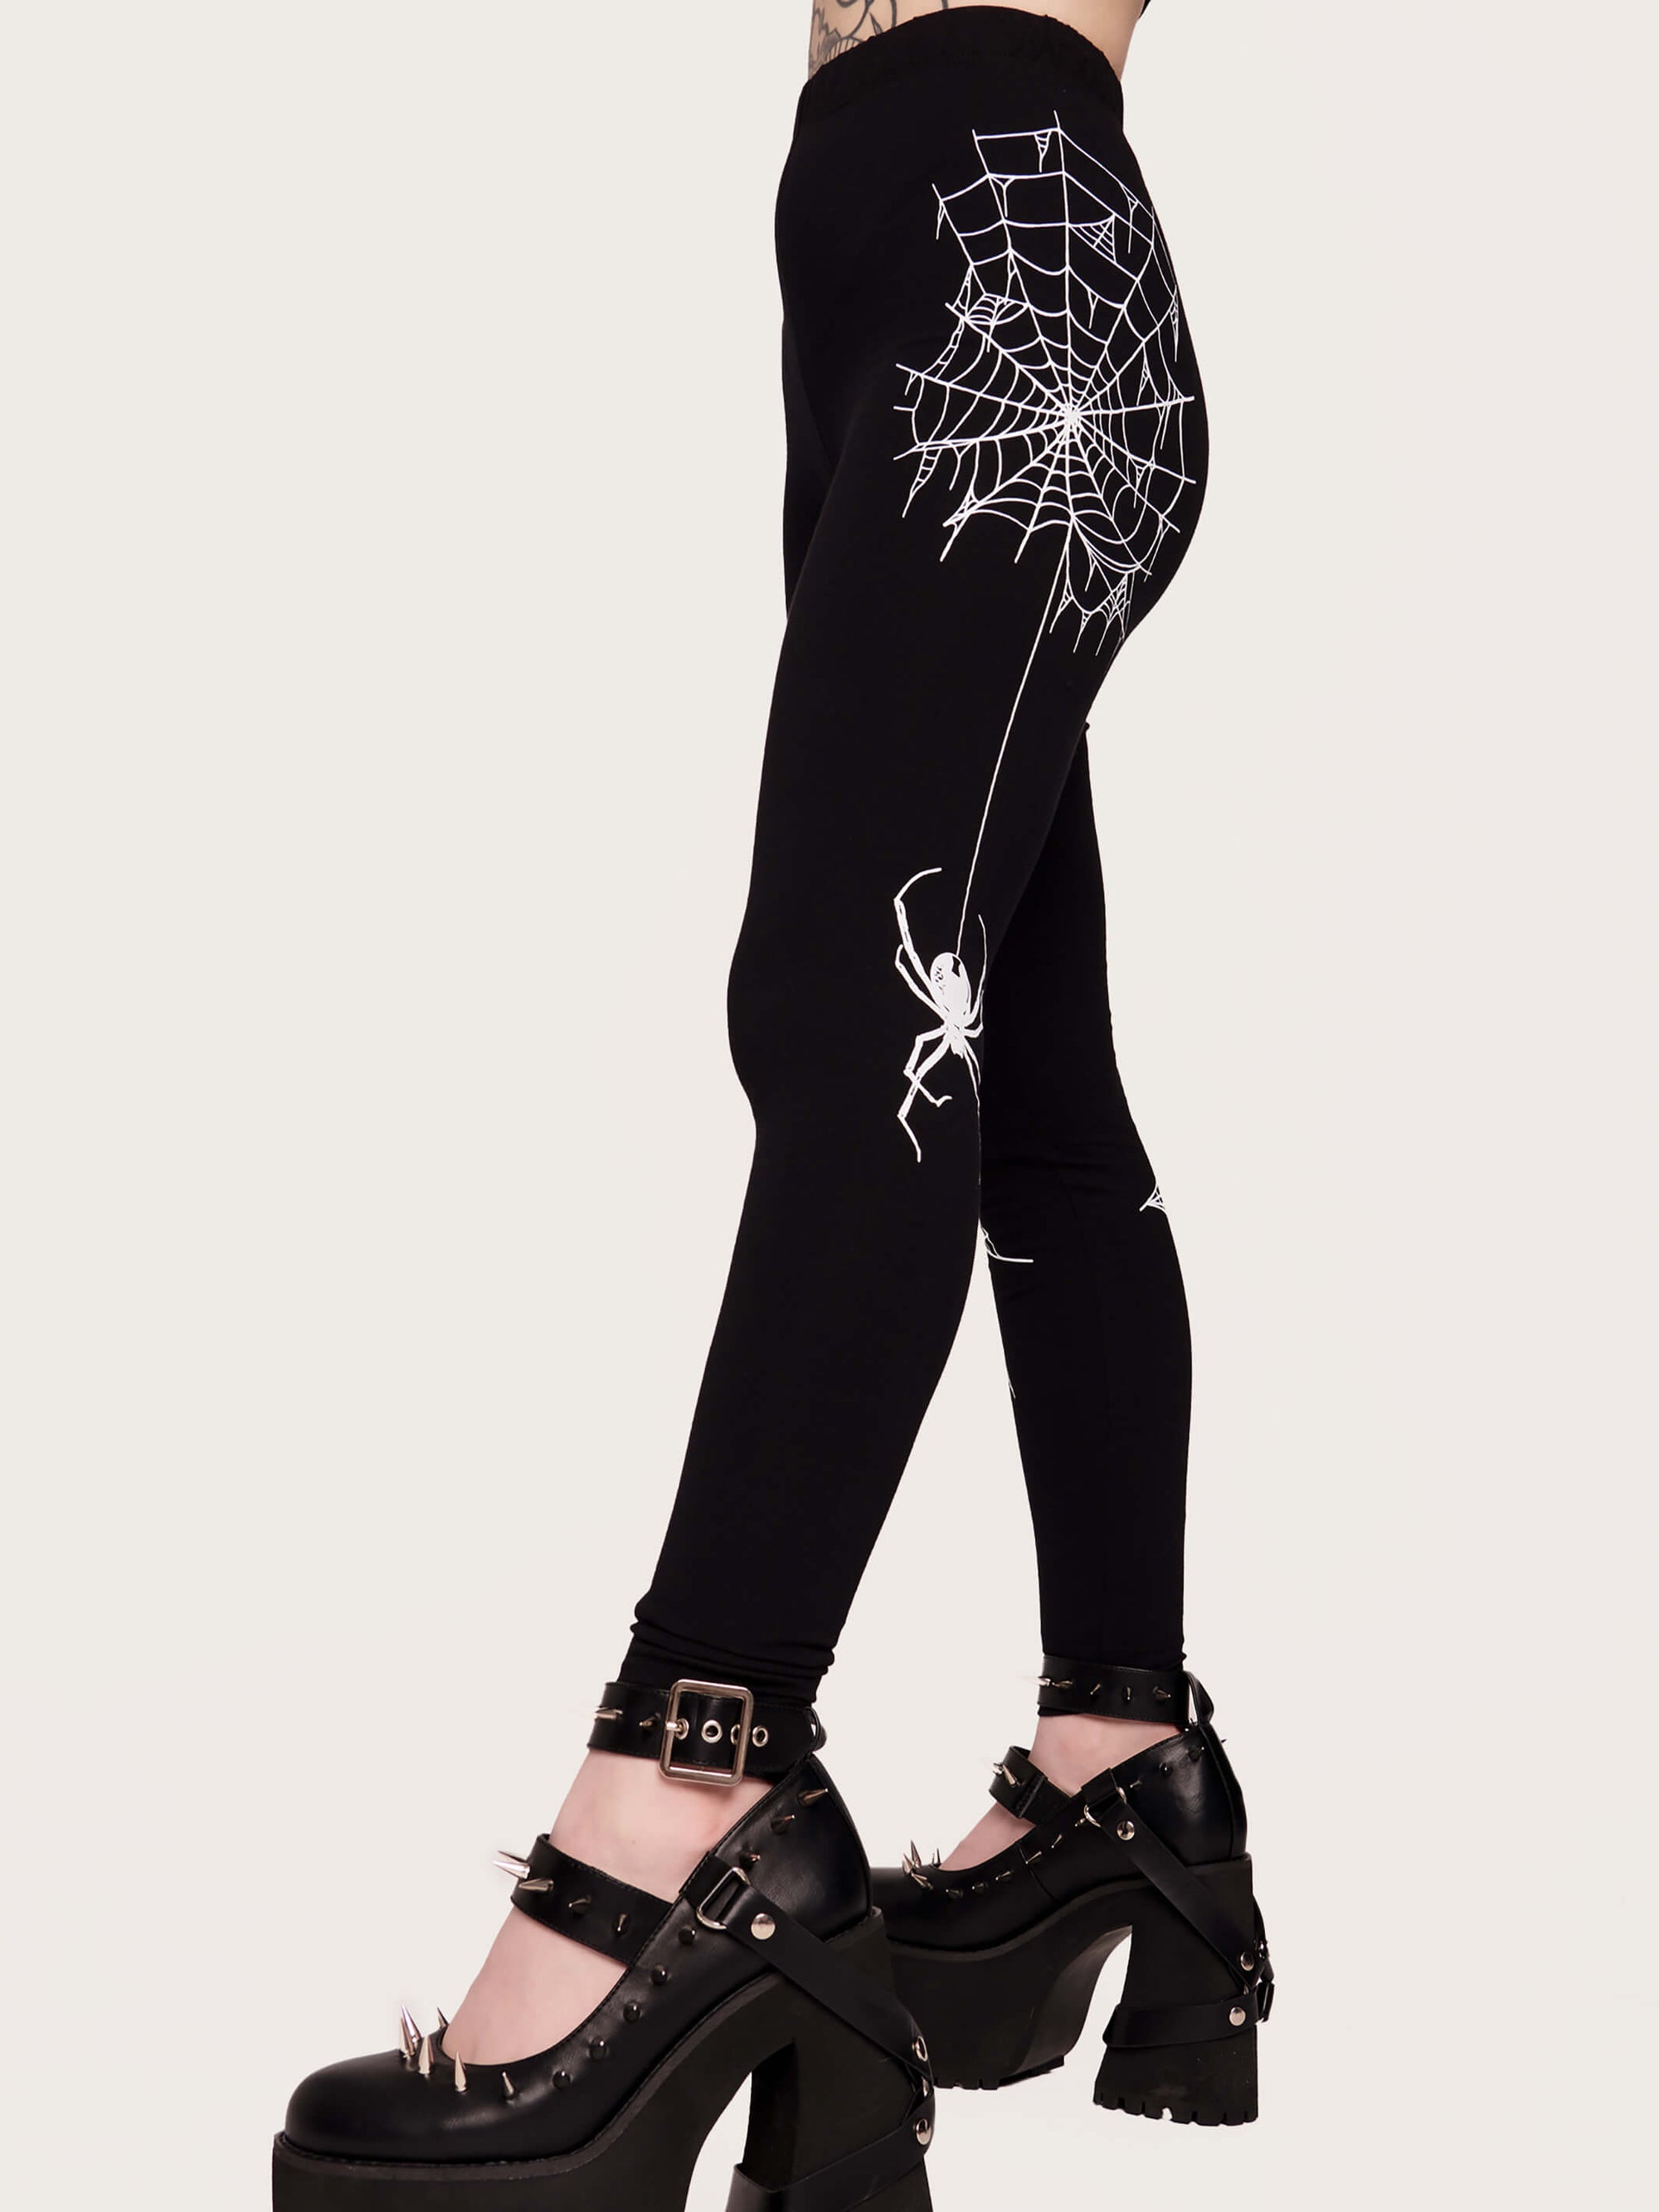 Spiderweb leggings. super soft and stretchy with elastic pull on waistband. Moon phases, witch symbols, constellations. nu goth fashion, goth legging, goth grunge fashion, dark aesthetic clothing. Goth fashion, alt girl fashion, goth clothing, witchy clothing, egirl fashion, dark aesthetic.